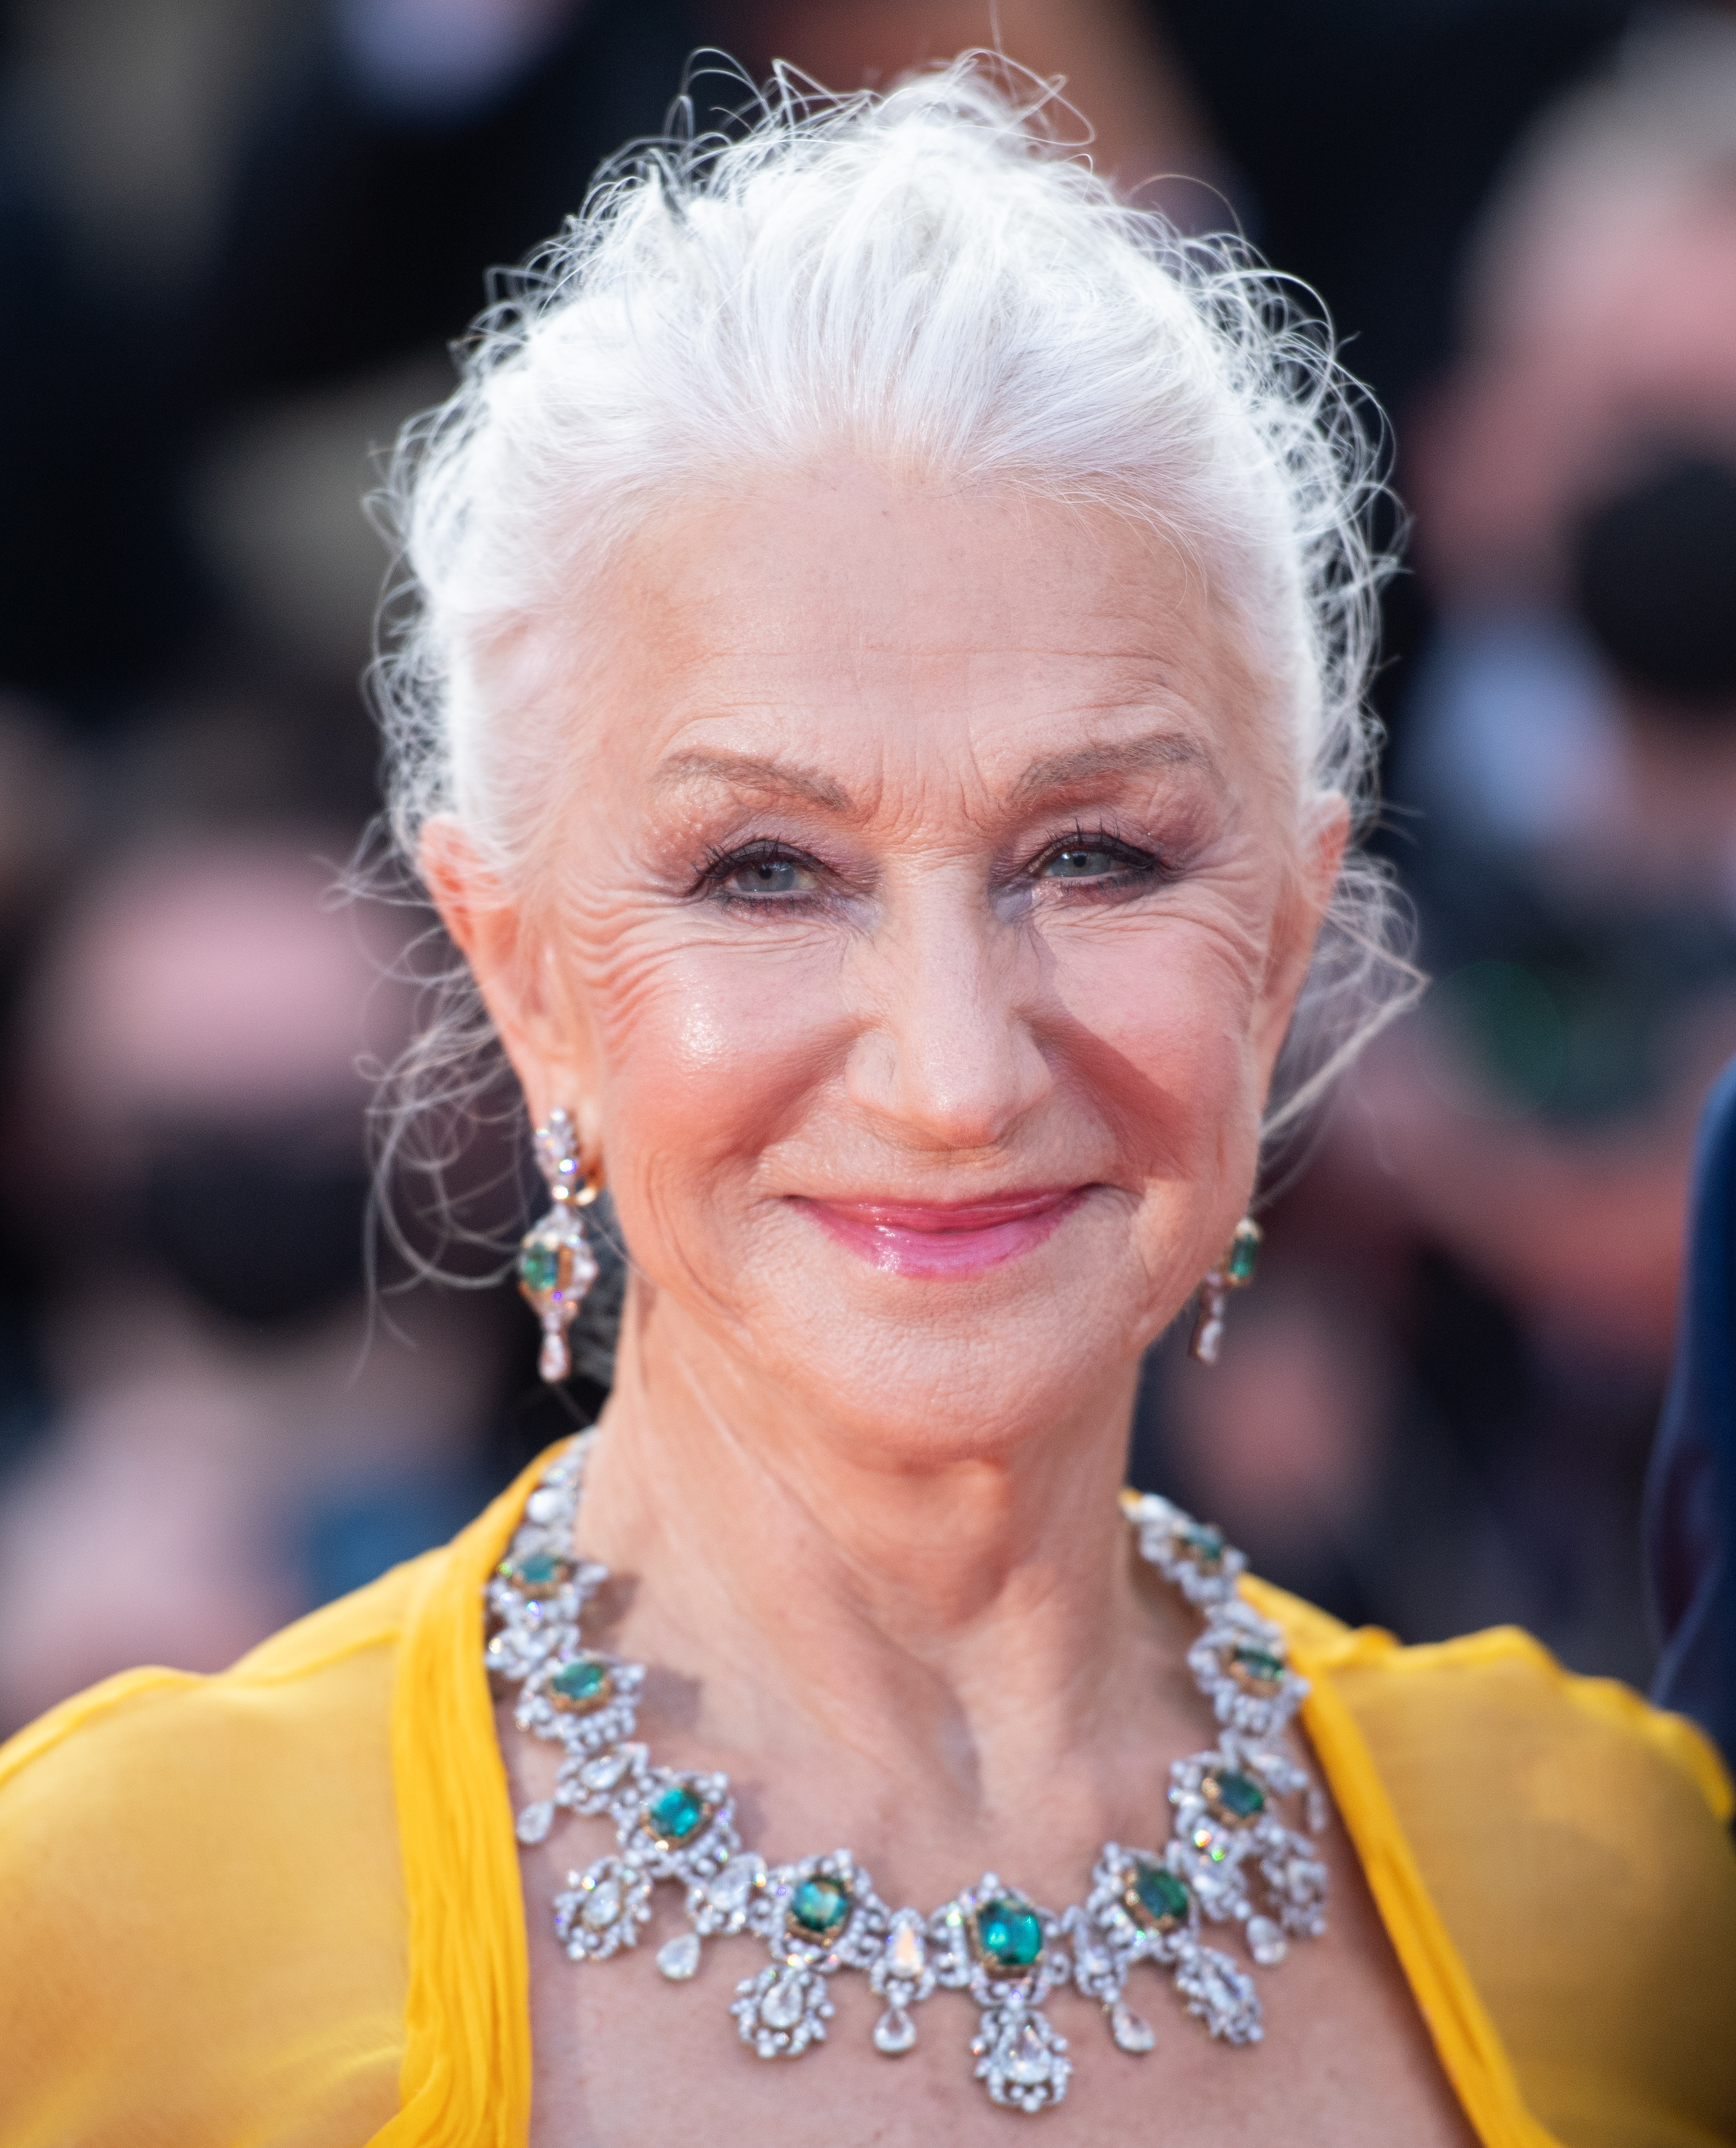 Helen Mirren at the 74th annual Cannes Film Festival. | Source: Getty Images